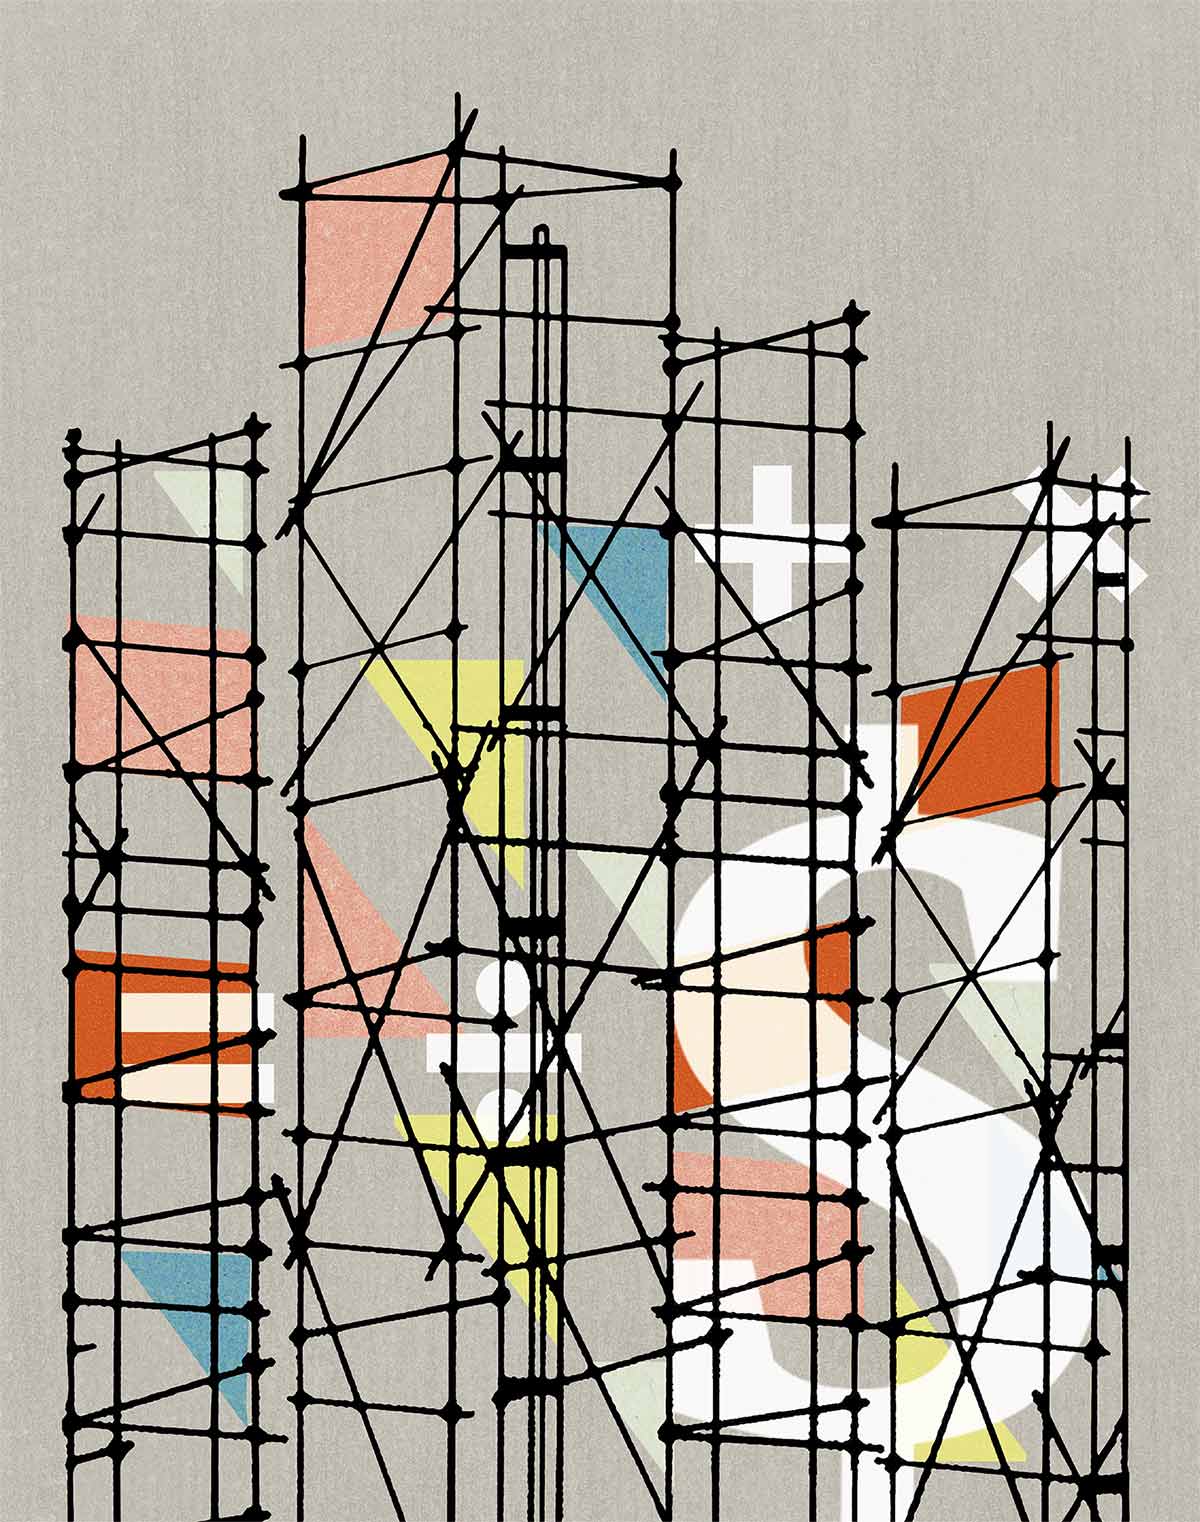 digital art of sky scraper shaped rectangles with muted yellow, rust, peach, and blue shapes in the background as well as mathematical signs